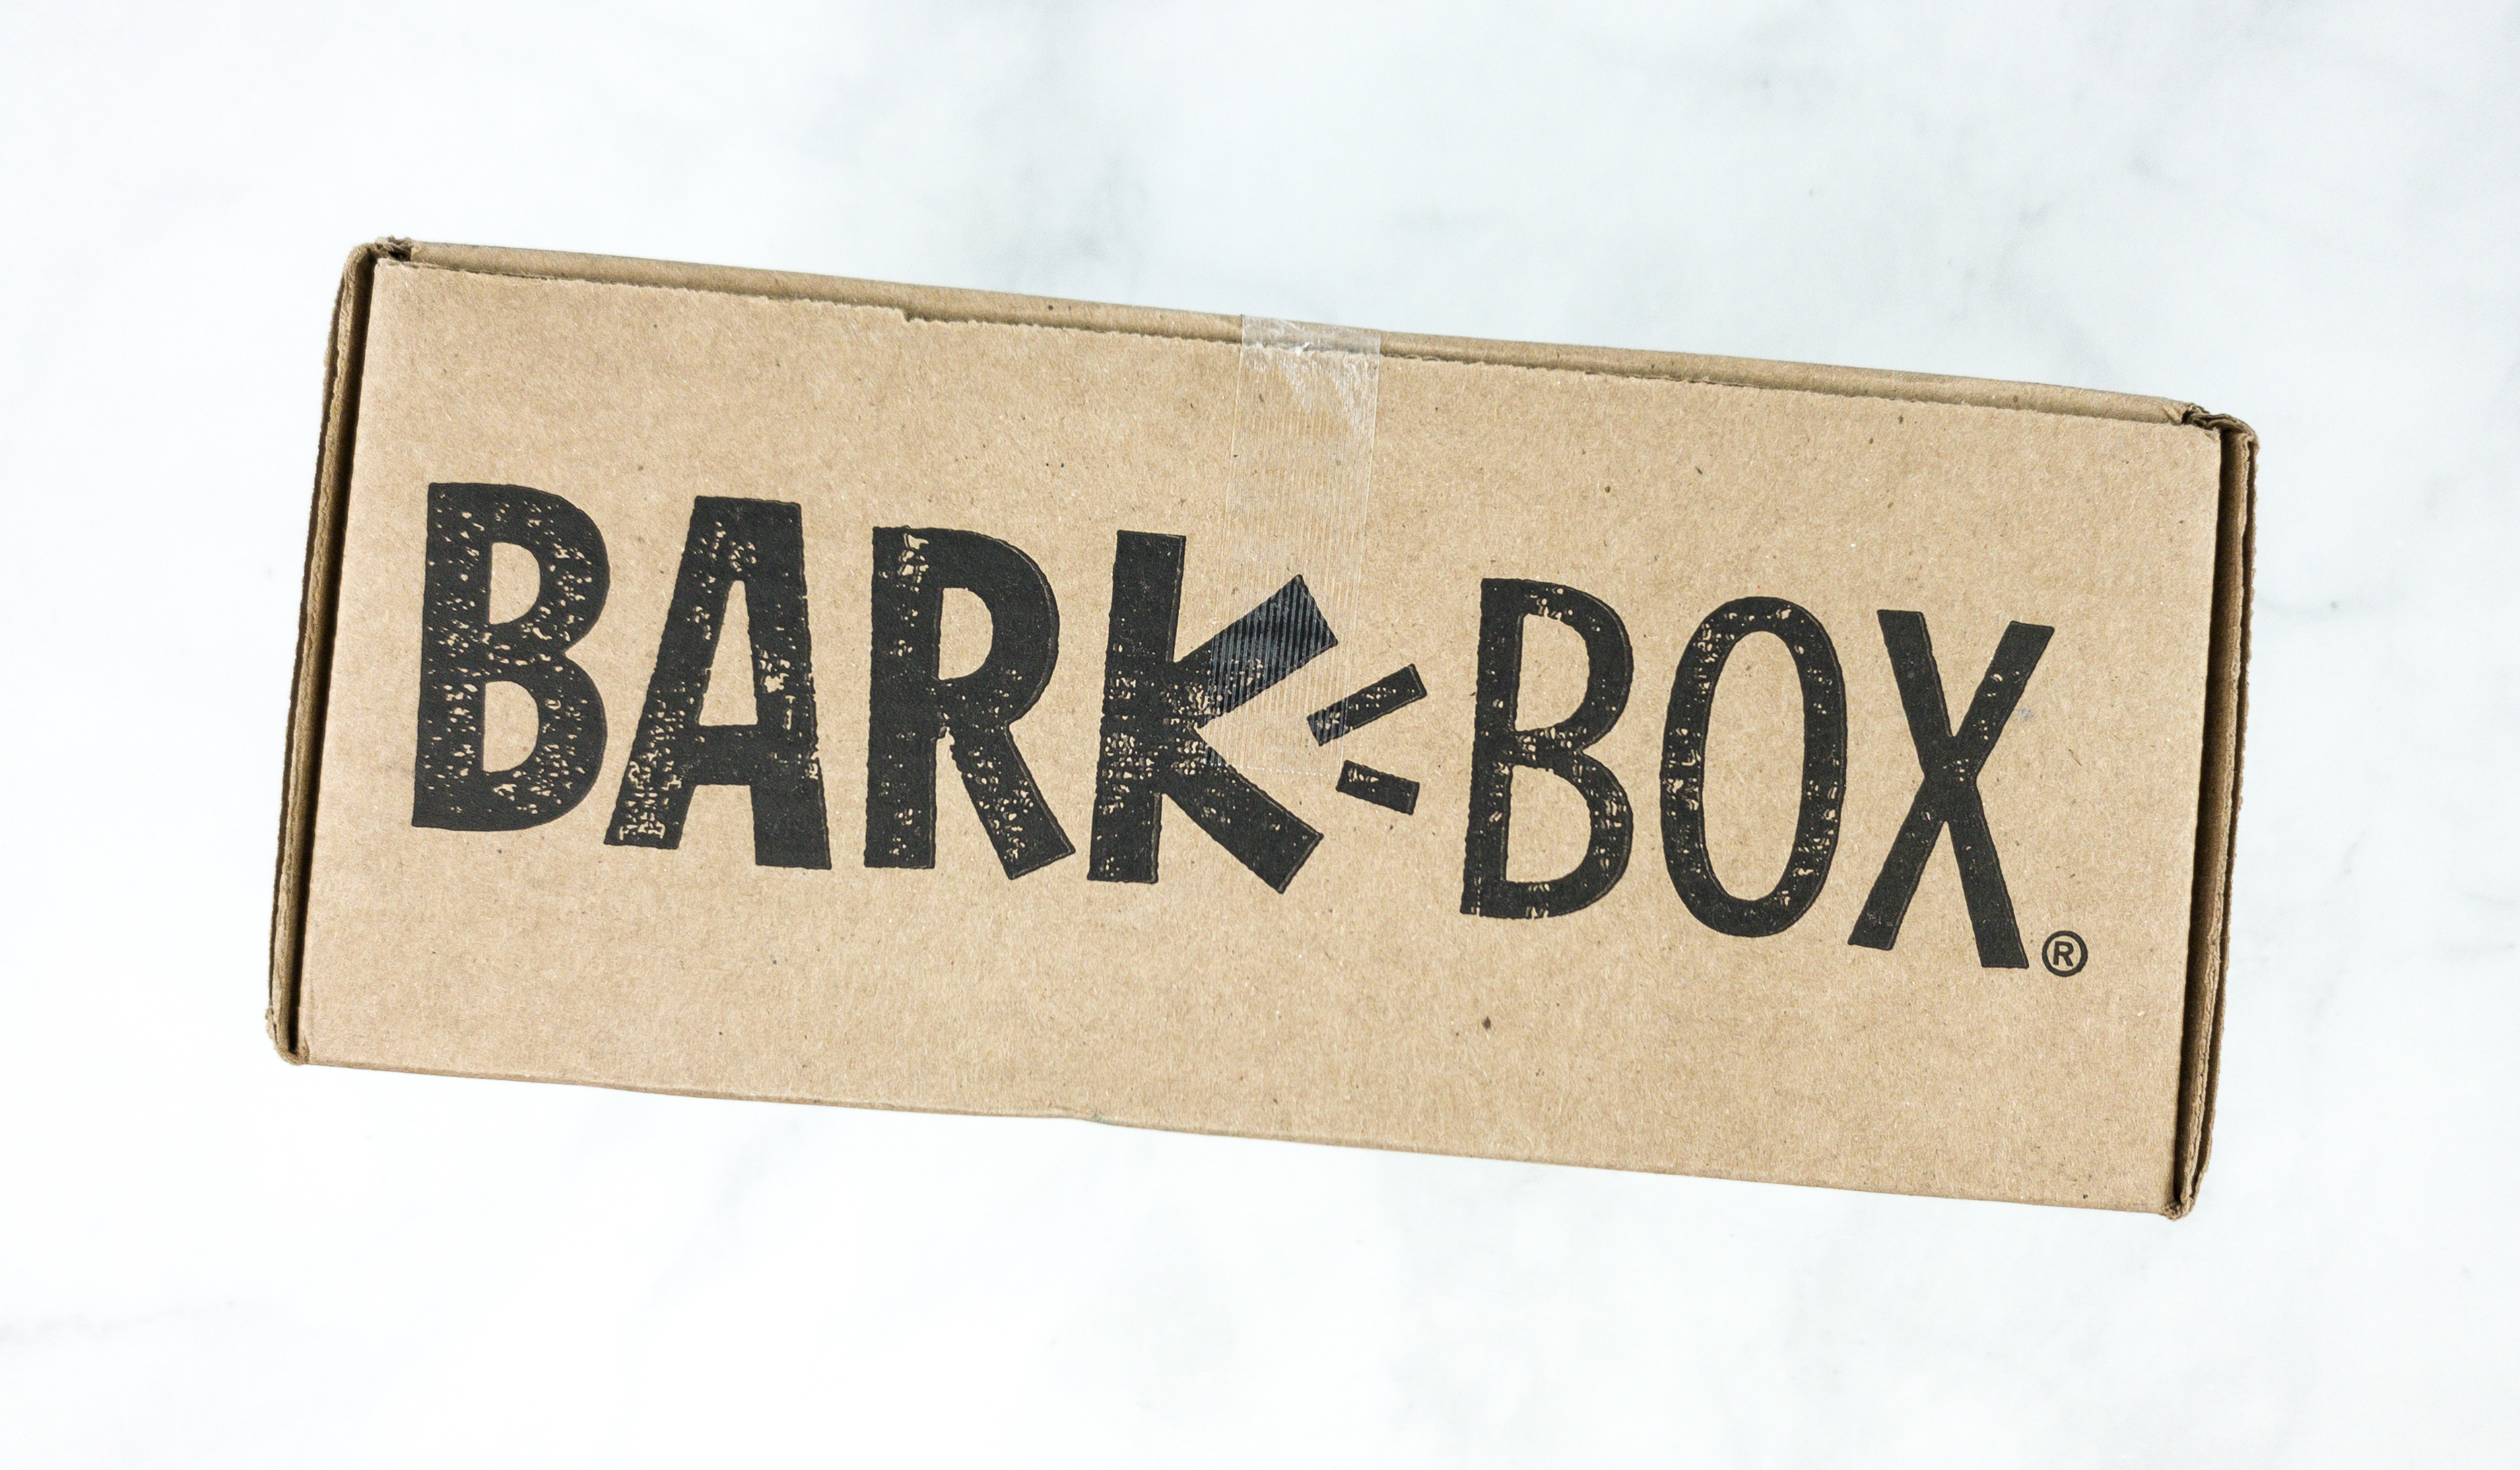 how much are bark boxes